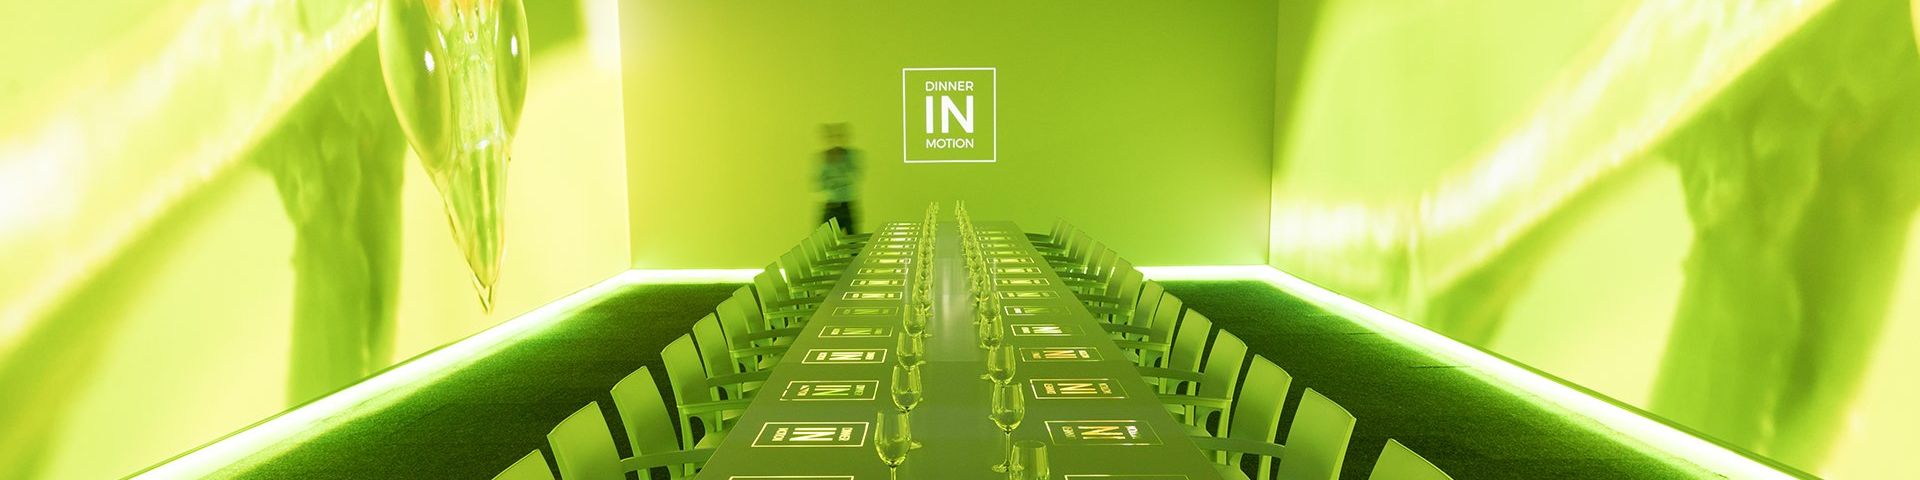 A long dining table, bathed in green light with the Dinner in Motion logos projected onto it.